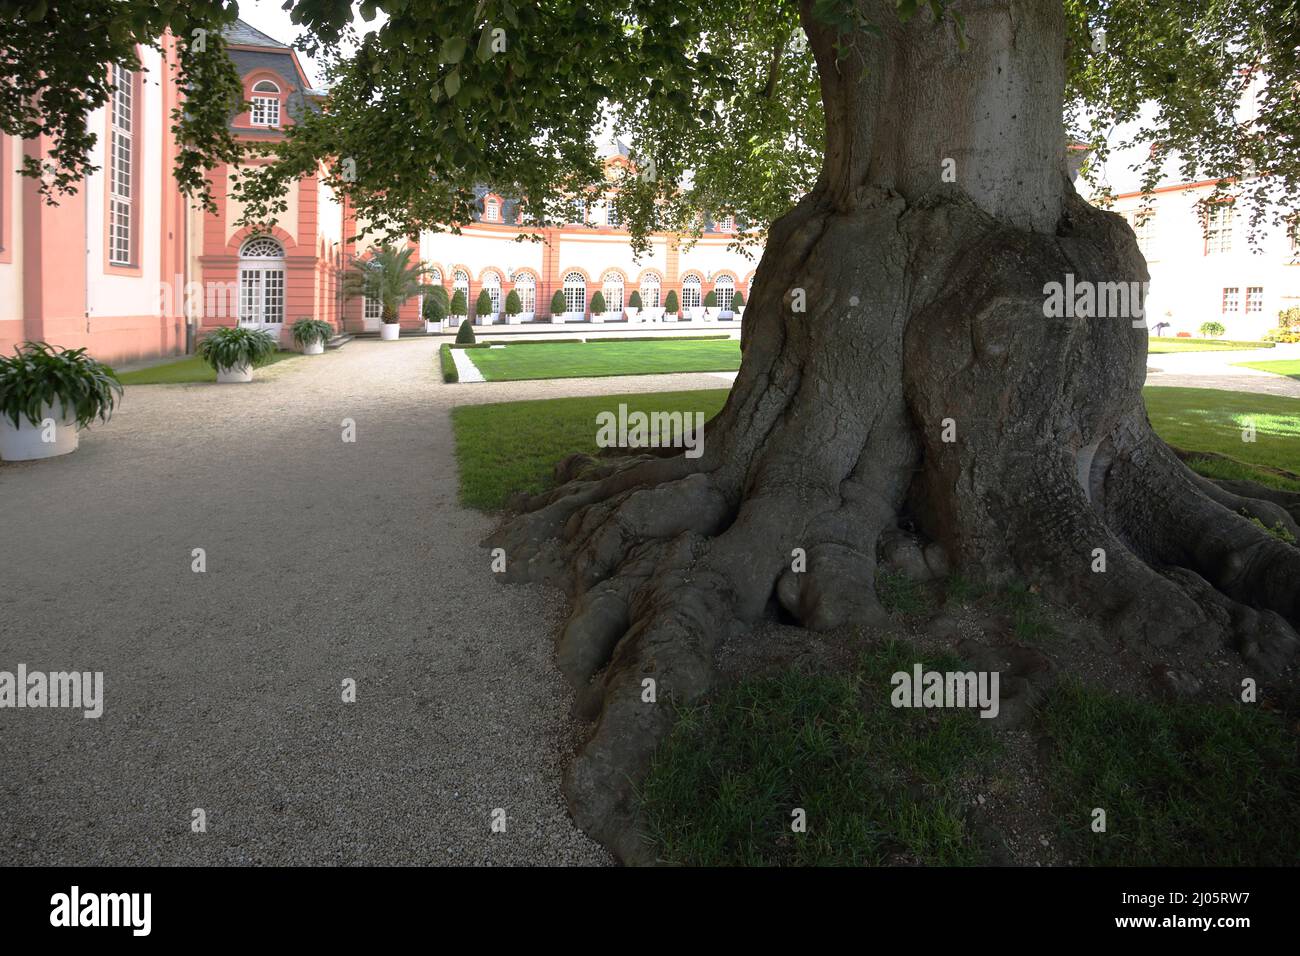 Old linden tree in the castle garden in Weilburg, Hesse, Germany Stock Photo